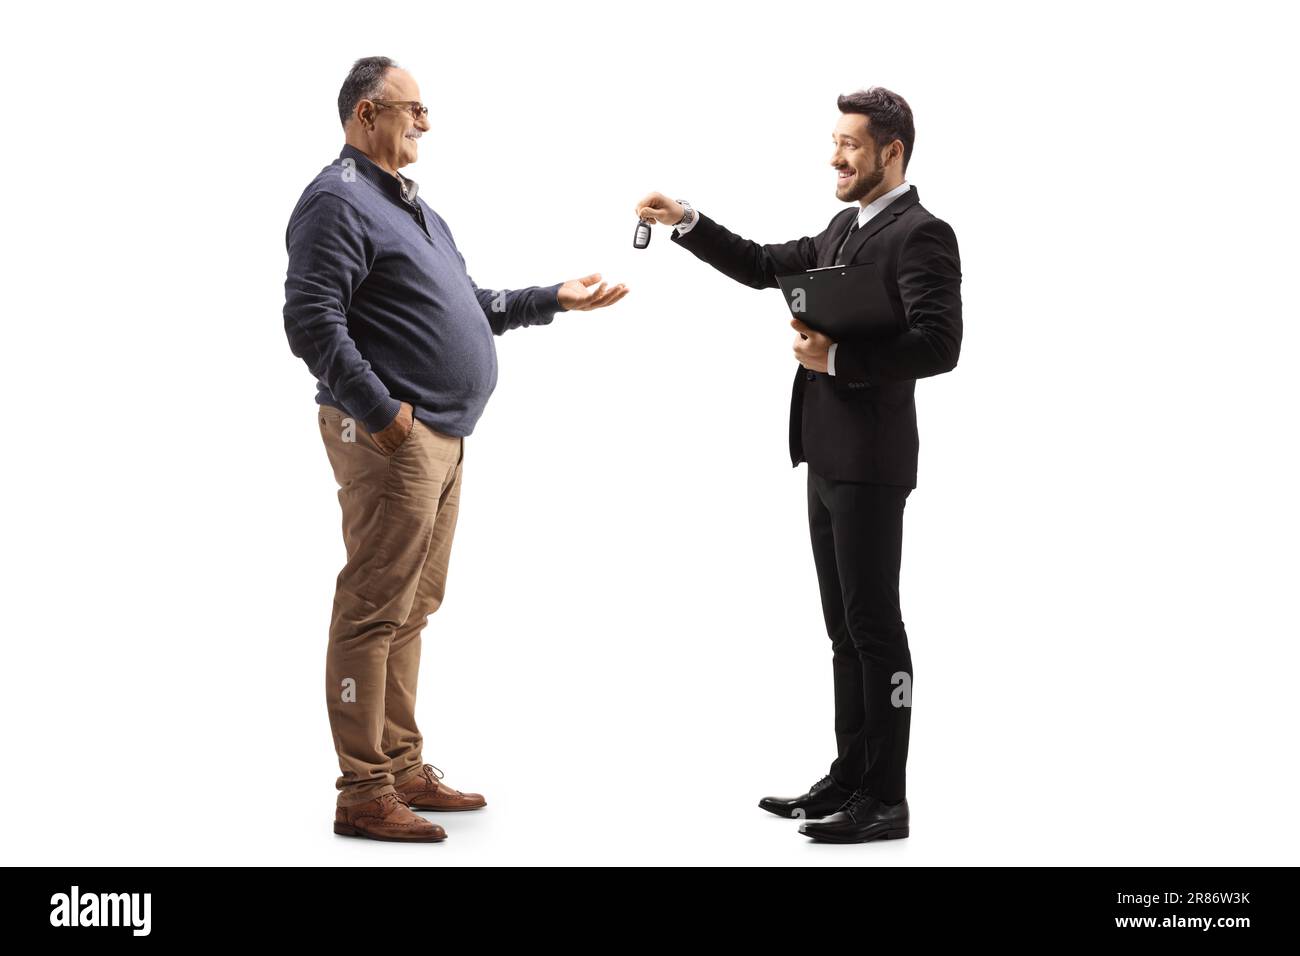 Businessman giving car keys to a mature man isolated on white background Stock Photo